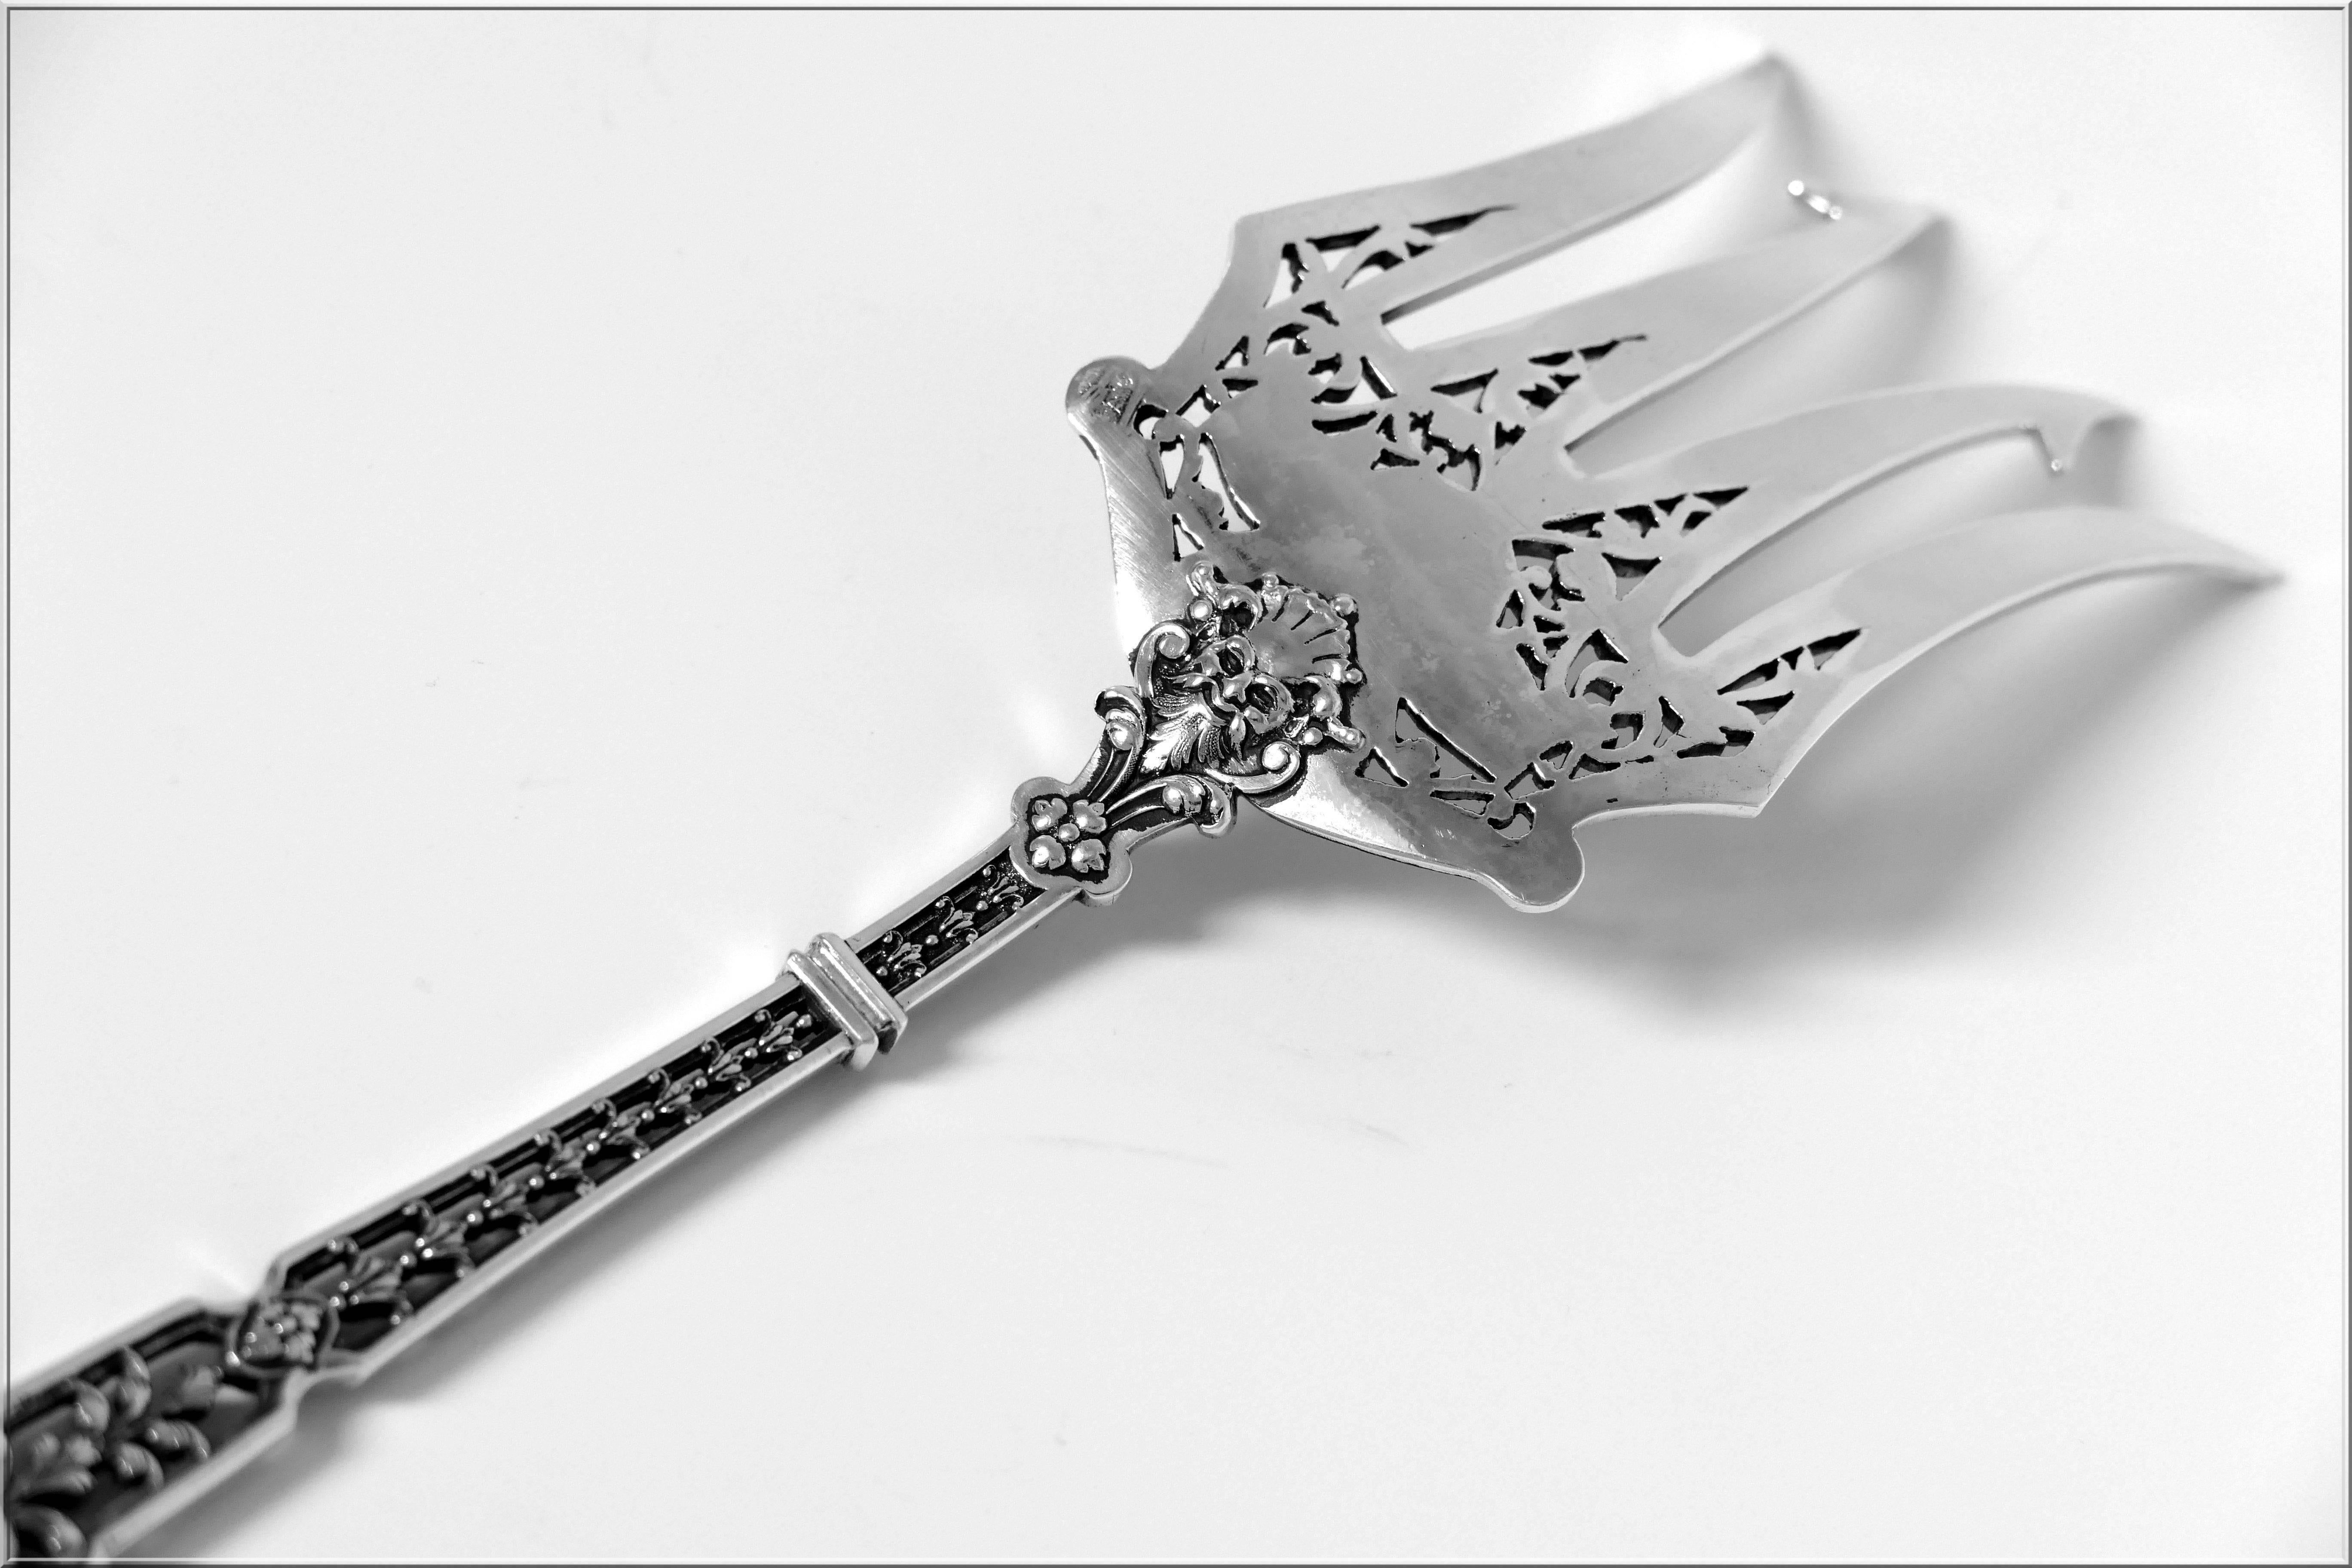 Puiforcat Masterpiece French All Sterling Silver Serving Fork 9